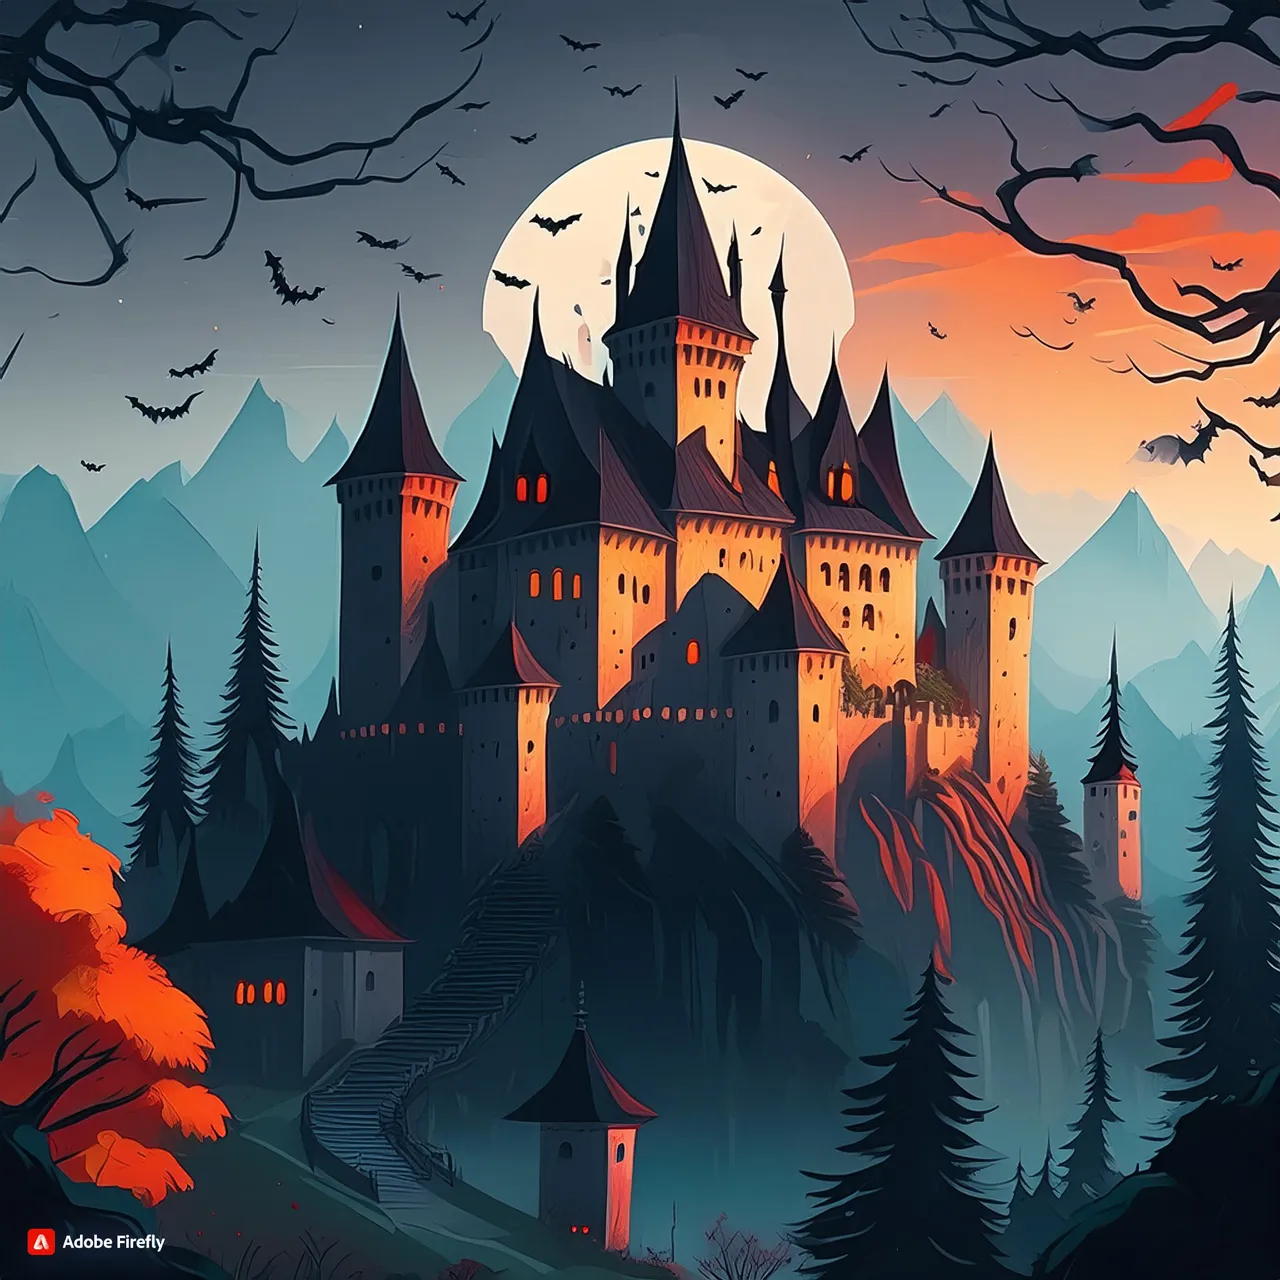 a painting of a castle on a hill at night